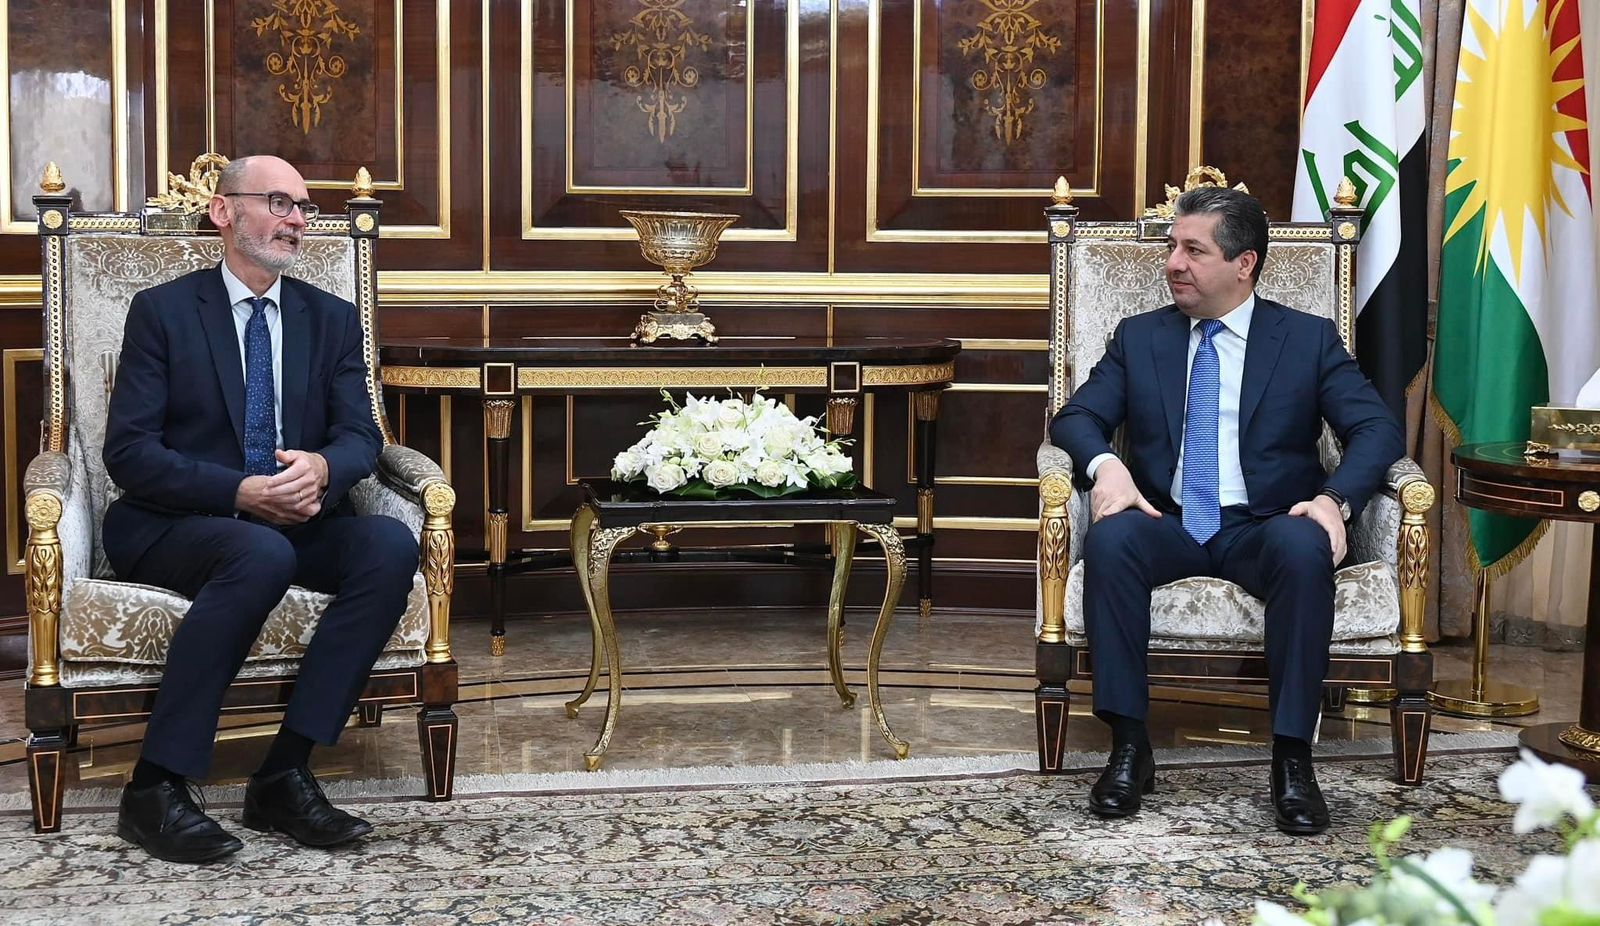 KRG’s premier and British Ambassador discuss disputes and reforms